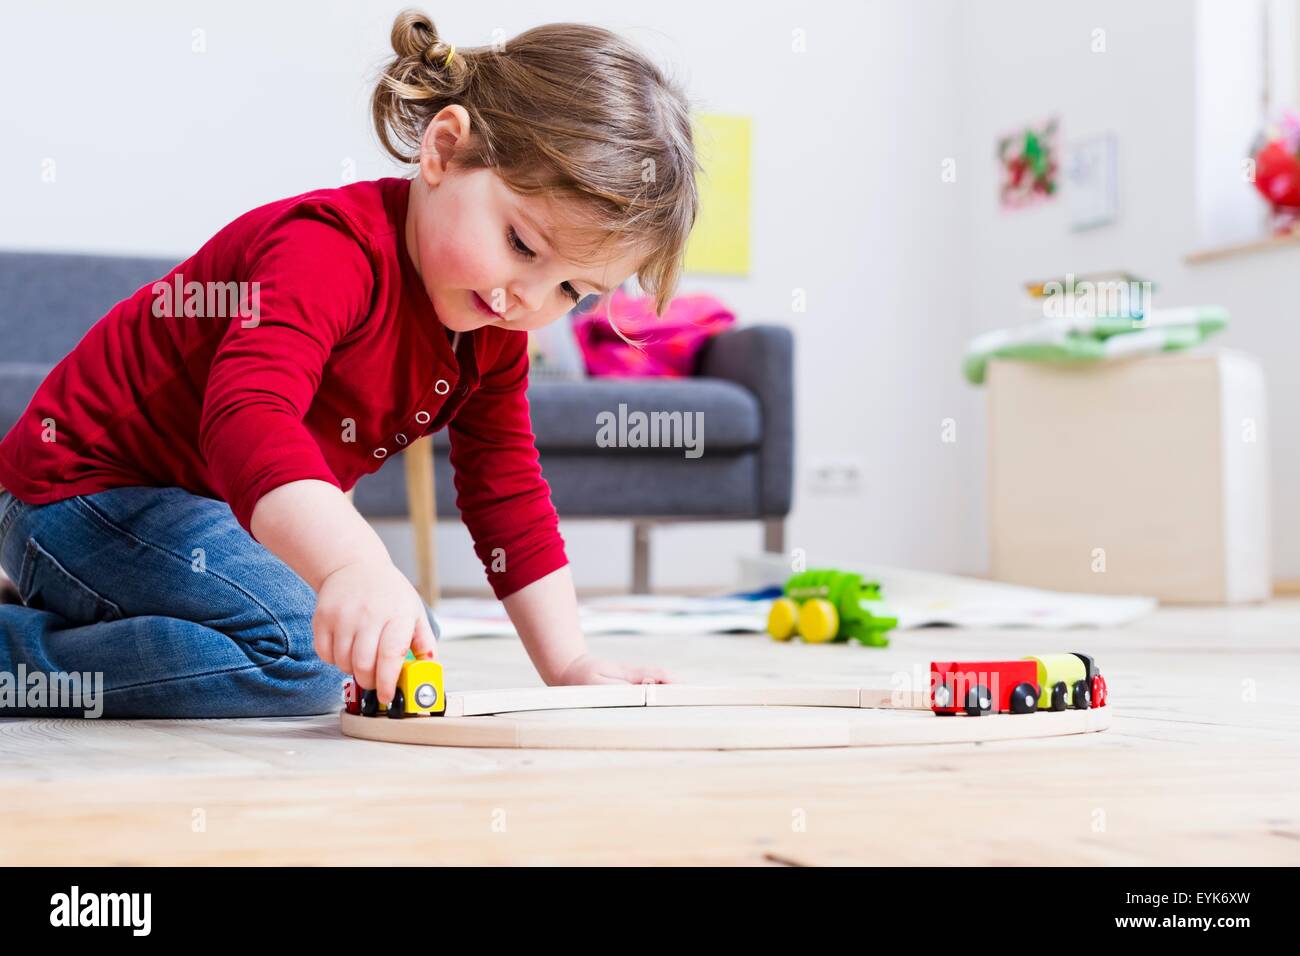 Girl playing with toy cars at home Stock Photo